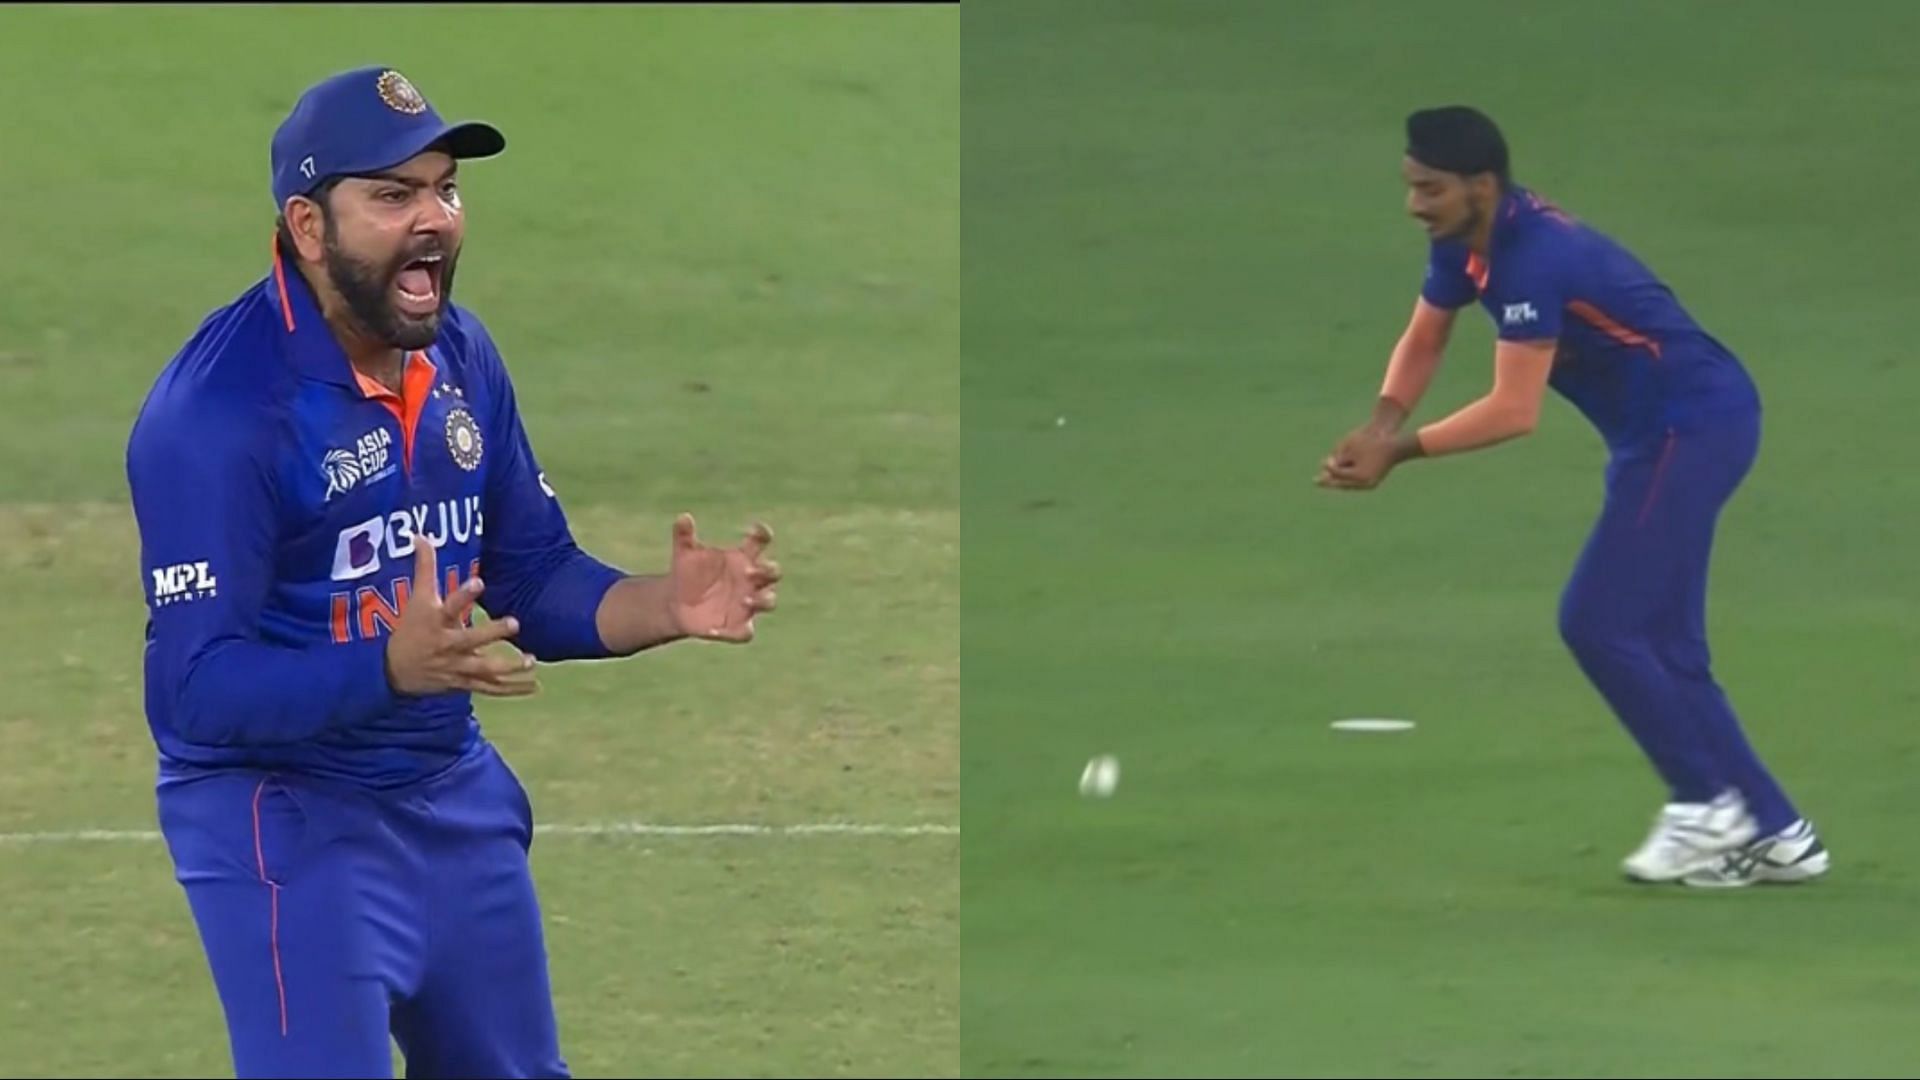 IND vs PAK 2022: [Watch] Captain Rohit Sharma loses his cool after Arshdeep Singh drops a simple-looking catch